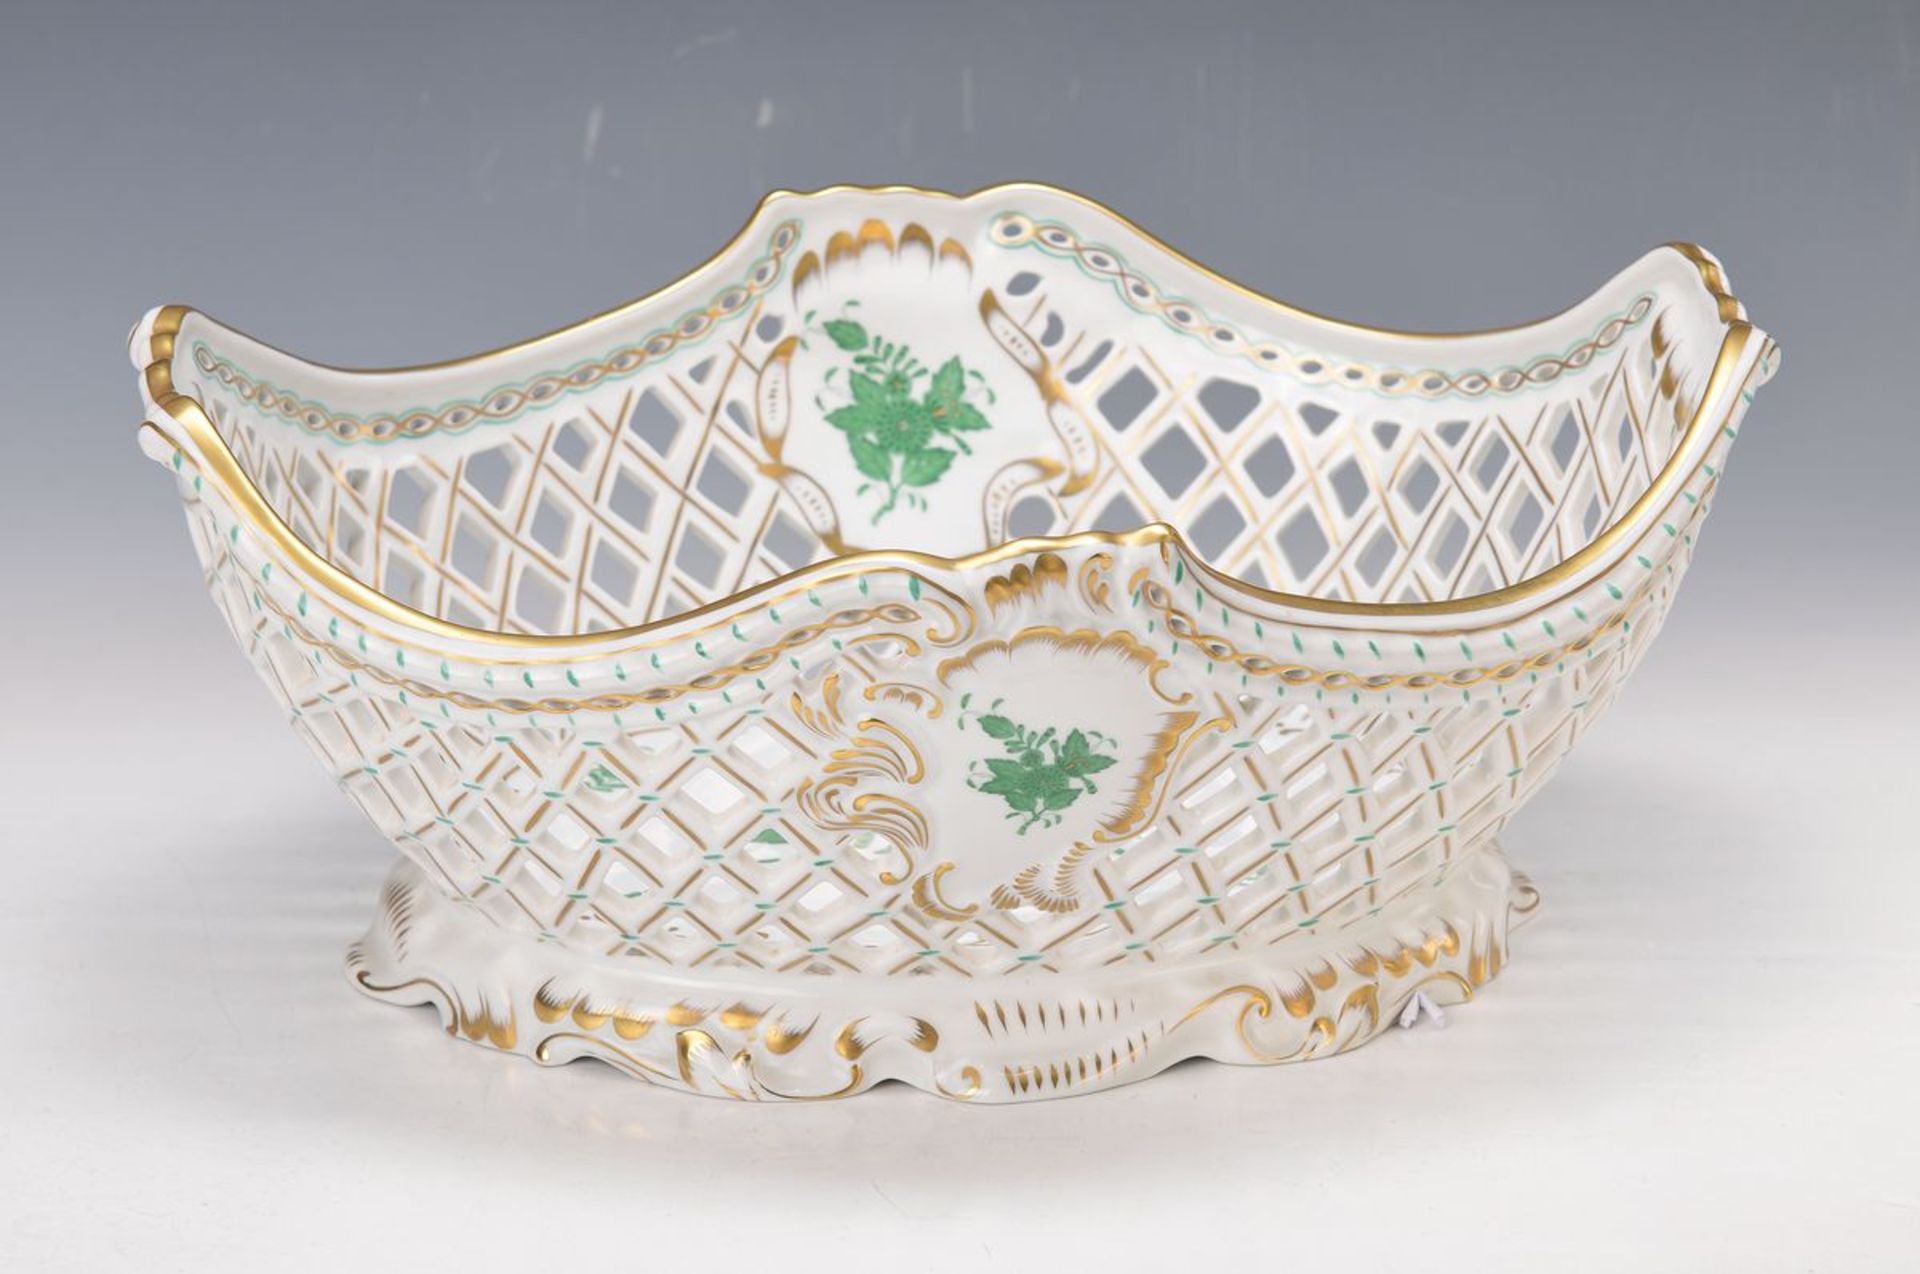 oversized basket bowl, Herend, Apponyi green, breakthrough work, interior and external painted,